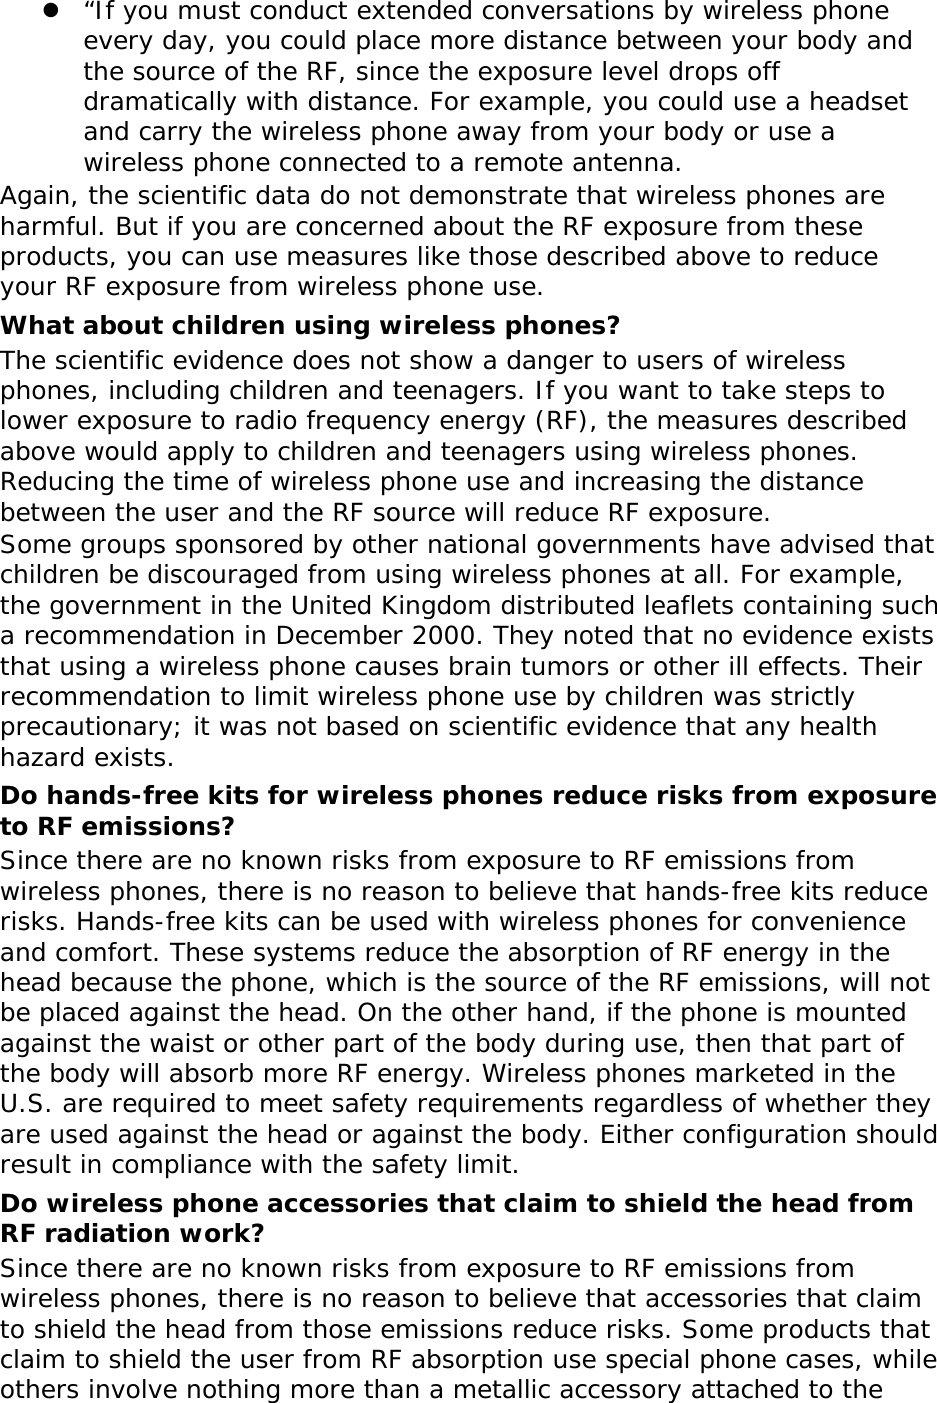  “If you must conduct extended conversations by wireless phone every day, you could place more distance between your body and the source of the RF, since the exposure level drops off dramatically with distance. For example, you could use a headset and carry the wireless phone away from your body or use a wireless phone connected to a remote antenna. Again, the scientific data do not demonstrate that wireless phones are harmful. But if you are concerned about the RF exposure from these products, you can use measures like those described above to reduce your RF exposure from wireless phone use. What about children using wireless phones? The scientific evidence does not show a danger to users of wireless phones, including children and teenagers. If you want to take steps to lower exposure to radio frequency energy (RF), the measures described above would apply to children and teenagers using wireless phones. Reducing the time of wireless phone use and increasing the distance between the user and the RF source will reduce RF exposure. Some groups sponsored by other national governments have advised that children be discouraged from using wireless phones at all. For example, the government in the United Kingdom distributed leaflets containing such a recommendation in December 2000. They noted that no evidence exists that using a wireless phone causes brain tumors or other ill effects. Their recommendation to limit wireless phone use by children was strictly precautionary; it was not based on scientific evidence that any health hazard exists.  Do hands-free kits for wireless phones reduce risks from exposure to RF emissions? Since there are no known risks from exposure to RF emissions from wireless phones, there is no reason to believe that hands-free kits reduce risks. Hands-free kits can be used with wireless phones for convenience and comfort. These systems reduce the absorption of RF energy in the head because the phone, which is the source of the RF emissions, will not be placed against the head. On the other hand, if the phone is mounted against the waist or other part of the body during use, then that part of the body will absorb more RF energy. Wireless phones marketed in the U.S. are required to meet safety requirements regardless of whether they are used against the head or against the body. Either configuration should result in compliance with the safety limit. Do wireless phone accessories that claim to shield the head from RF radiation work? Since there are no known risks from exposure to RF emissions from wireless phones, there is no reason to believe that accessories that claim to shield the head from those emissions reduce risks. Some products that claim to shield the user from RF absorption use special phone cases, while others involve nothing more than a metallic accessory attached to the 